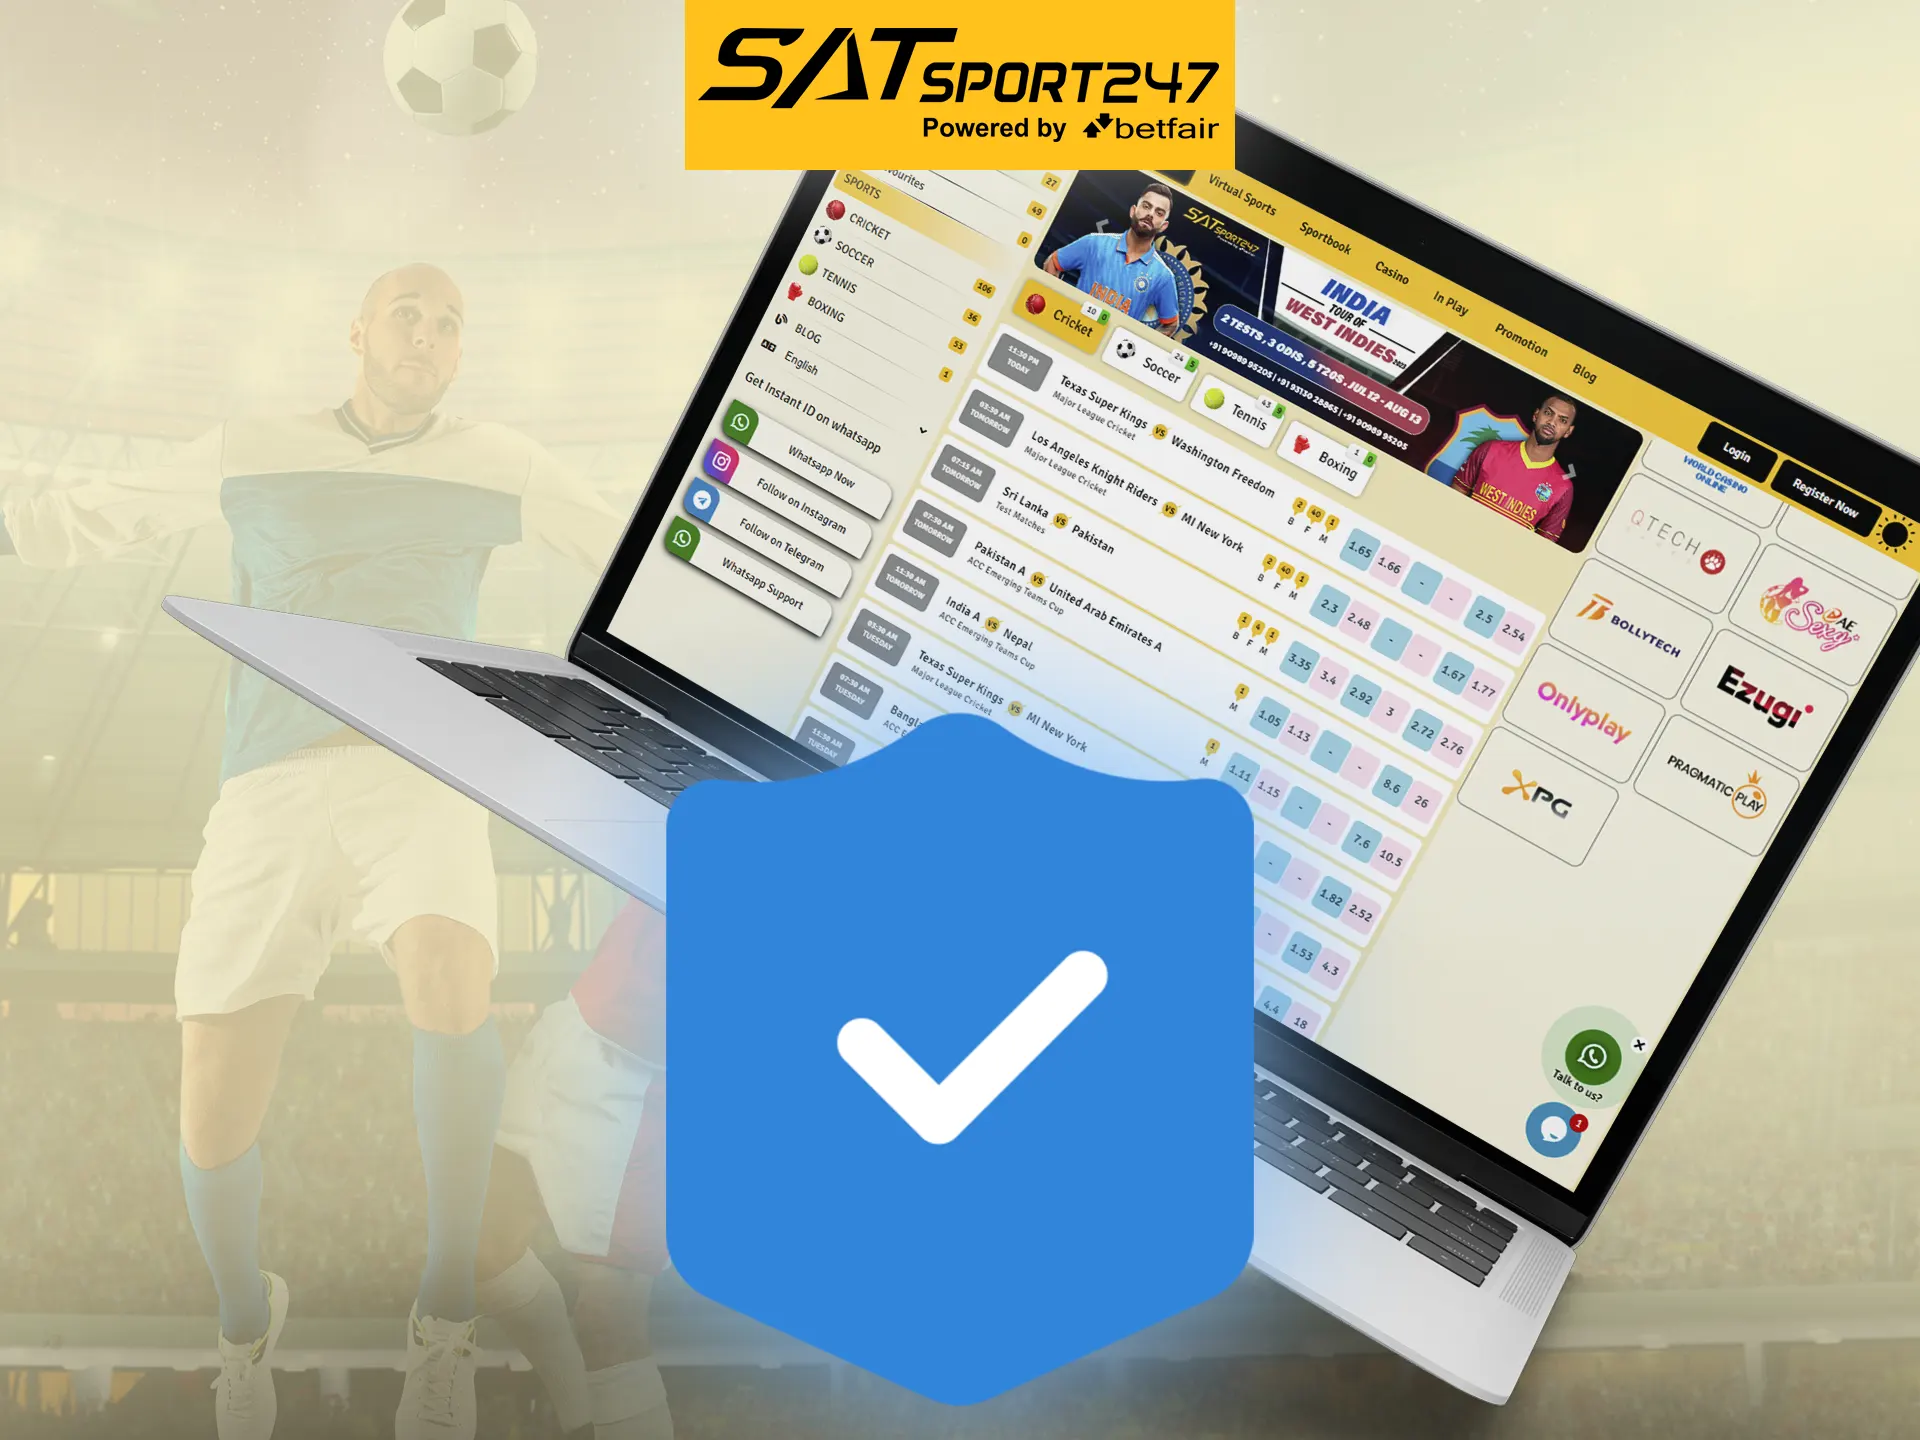 Satsport247 is safe for players and you can not worry about your data, they are secured.